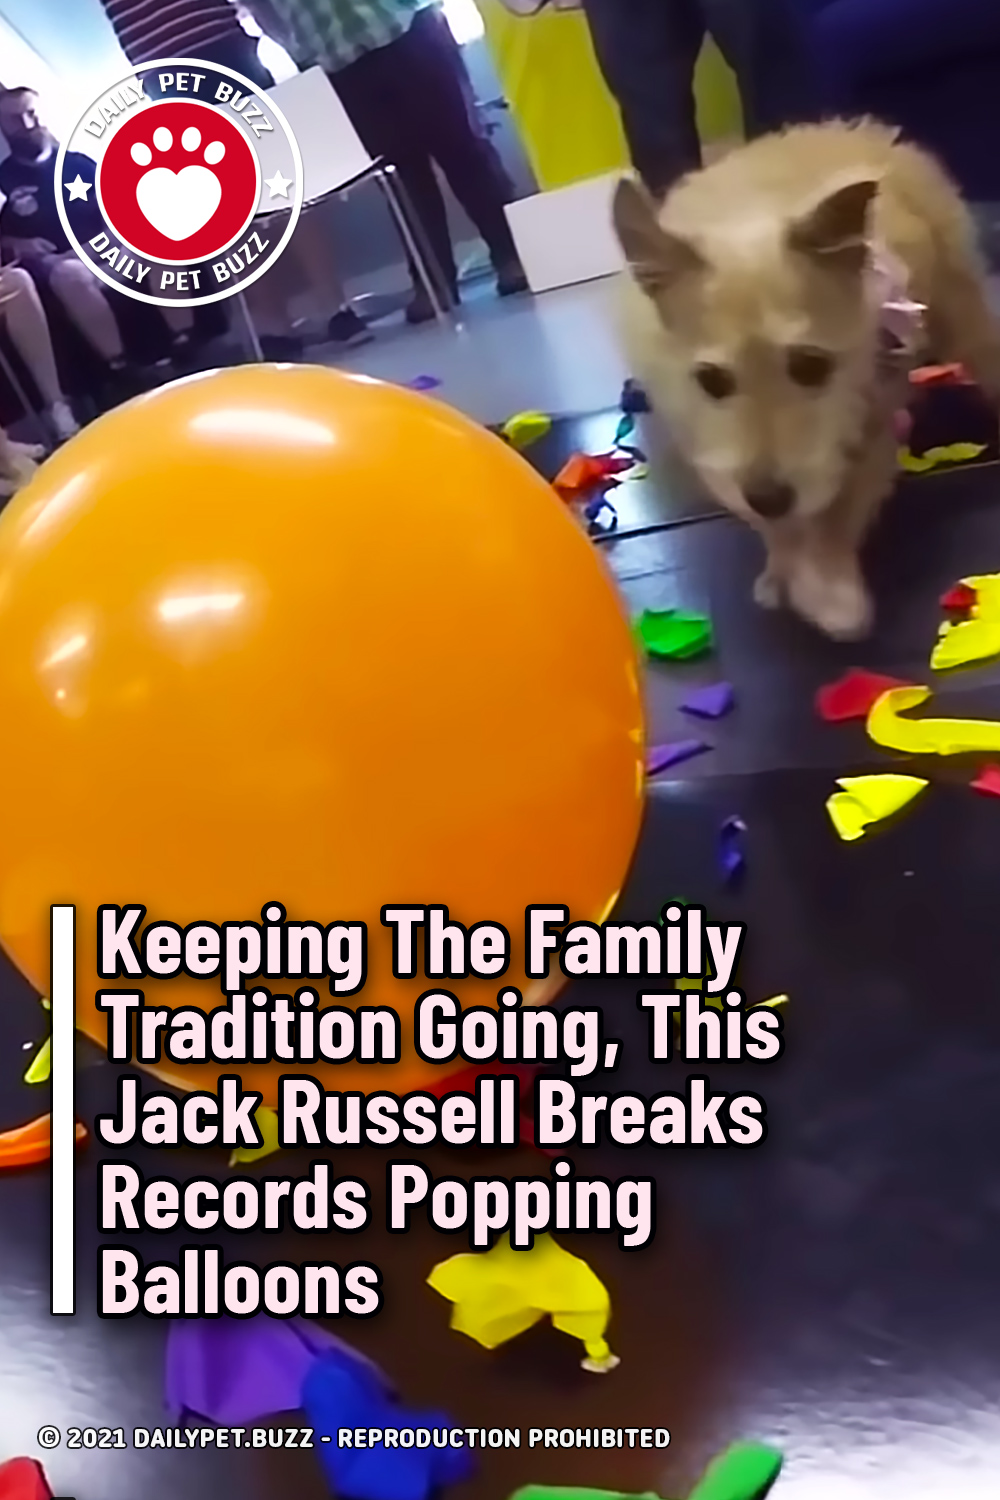 Keeping The Family Tradition Going, This Jack Russell Breaks Records Popping Balloons